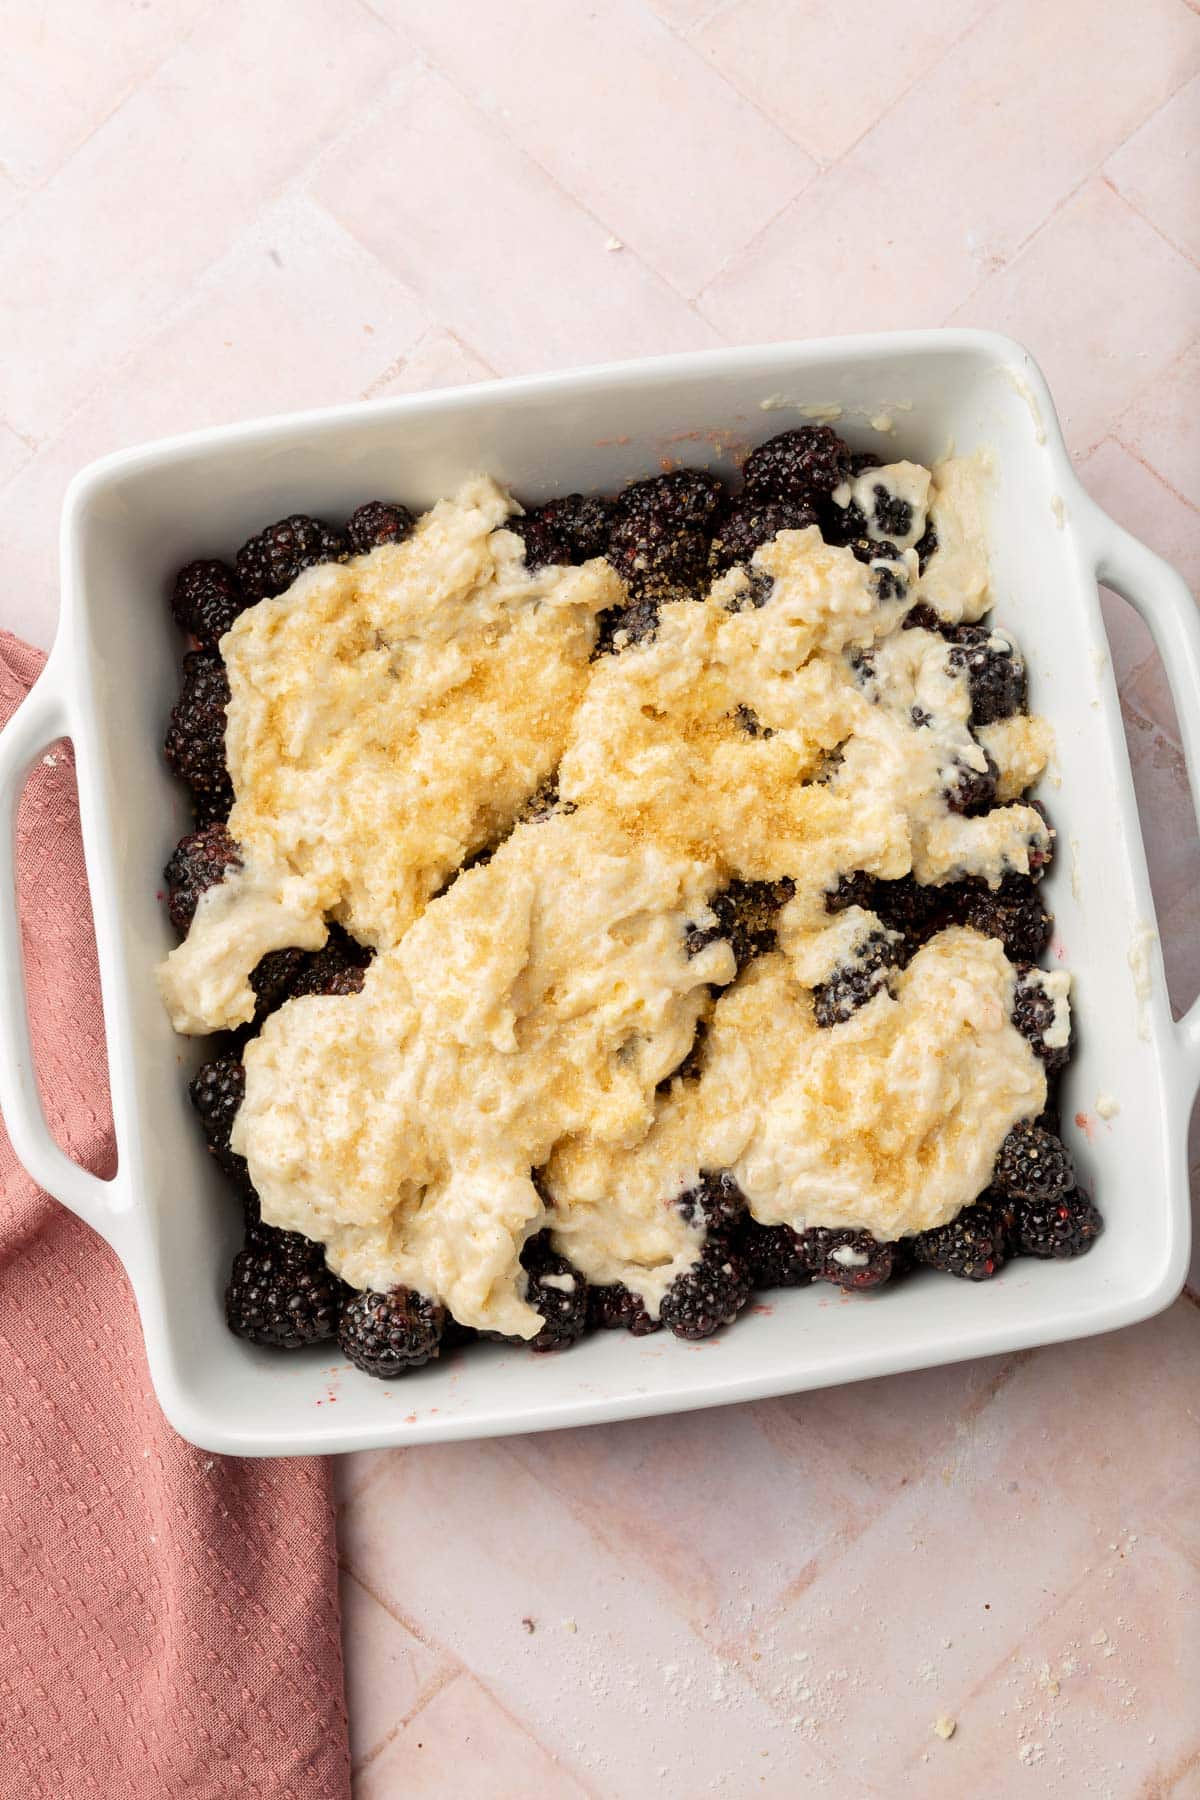 An overhead view of a square baking dish with blackberries topped with gluten-free cobbler batter and turbinado sugar before baking in the oven.